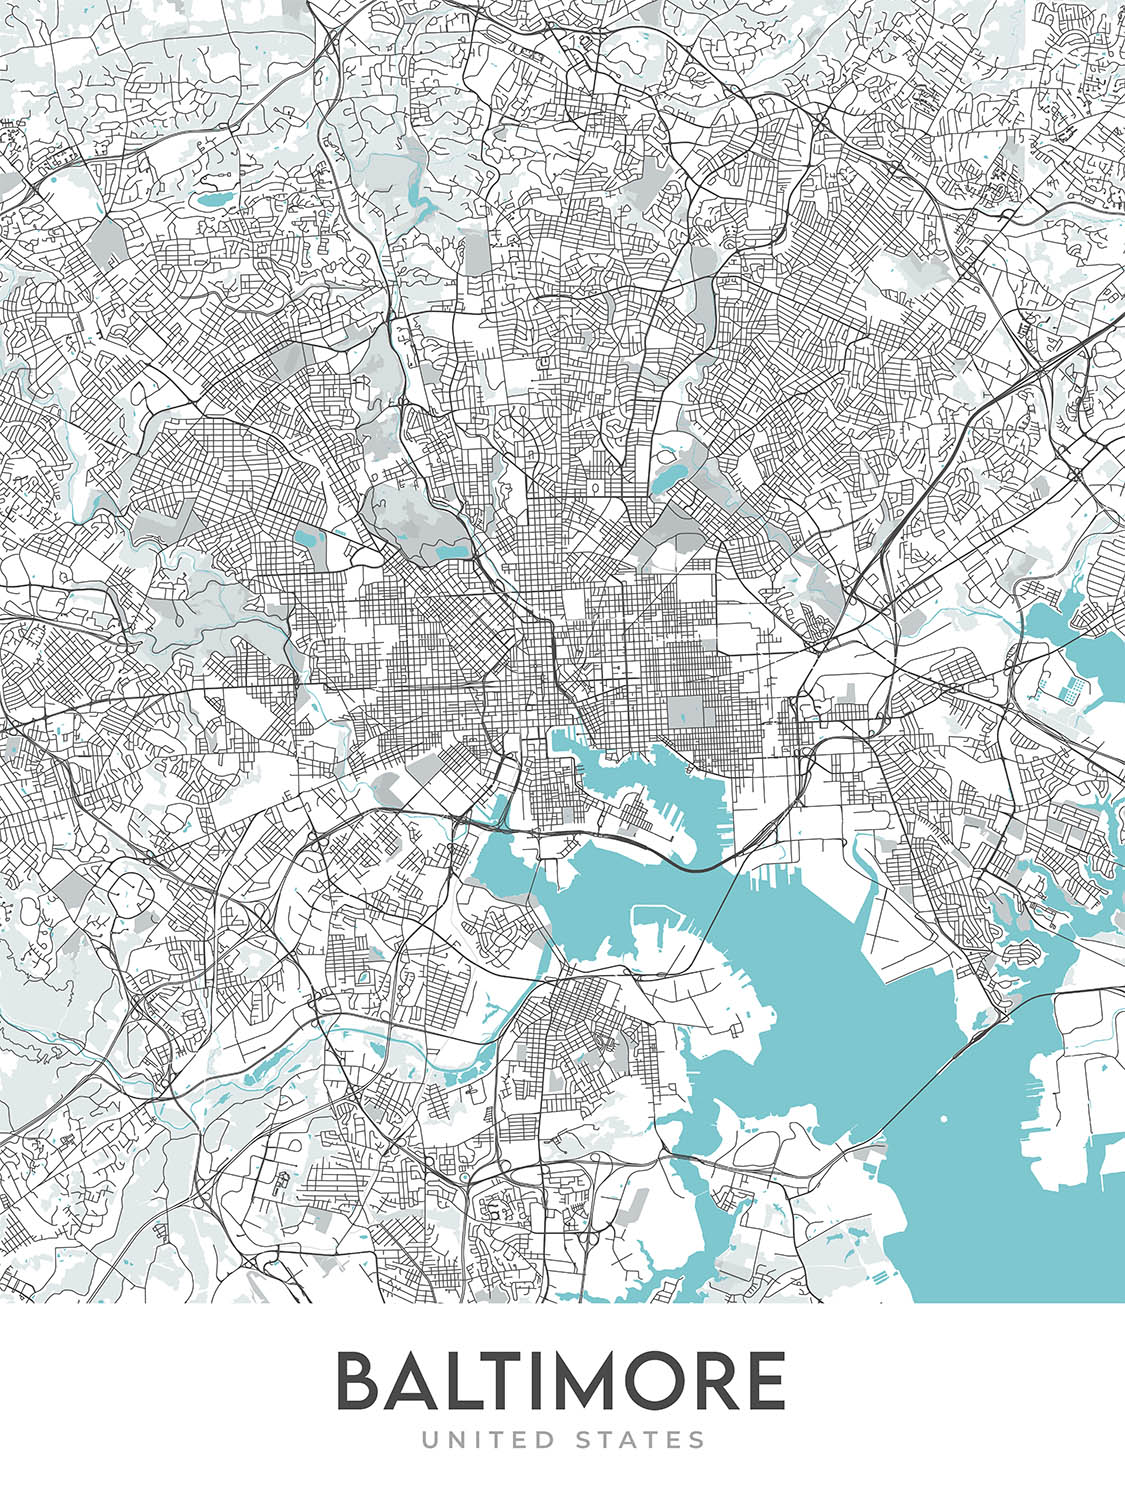 Modern City Map of Baltimore, MD: Inner Harbor, Oriole Park, U. of Maryland